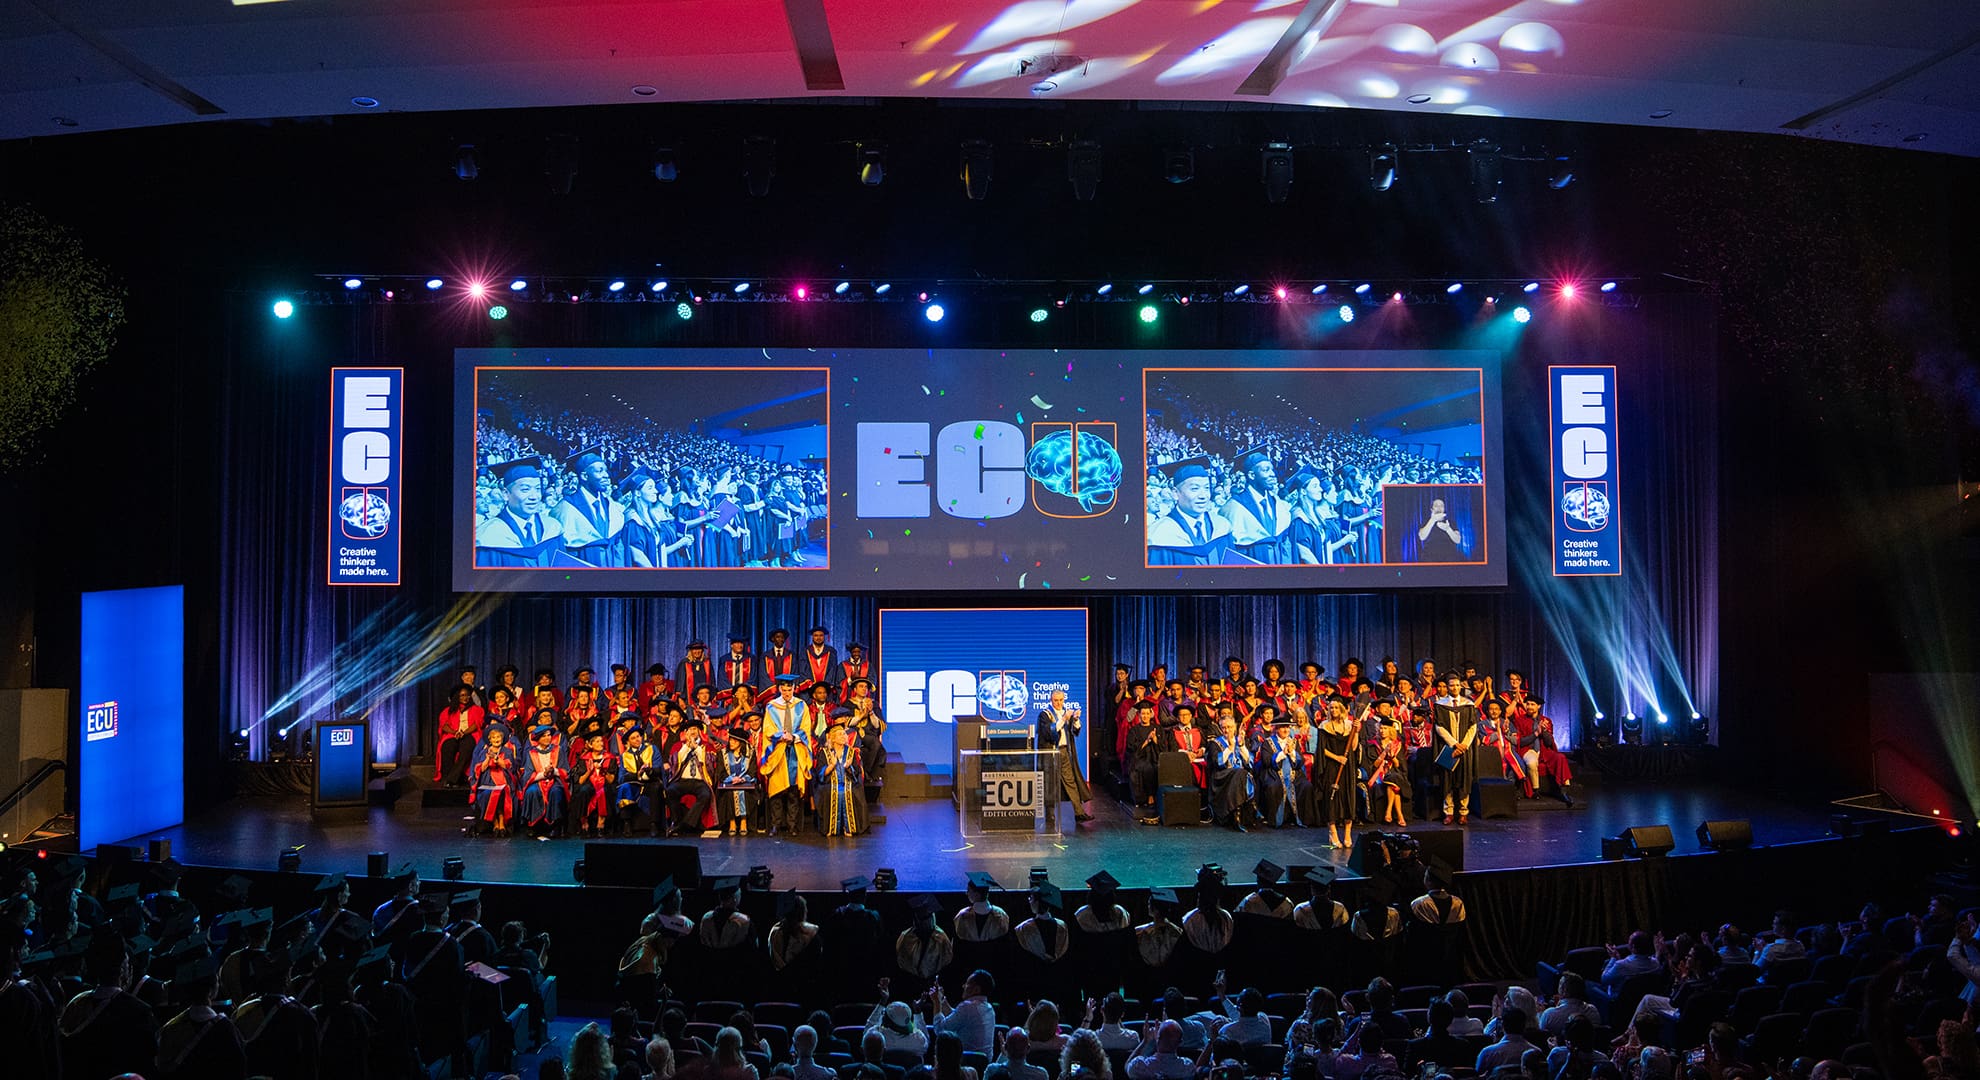 Full stage of graduation ceremony at the PCB, screens showing the audience